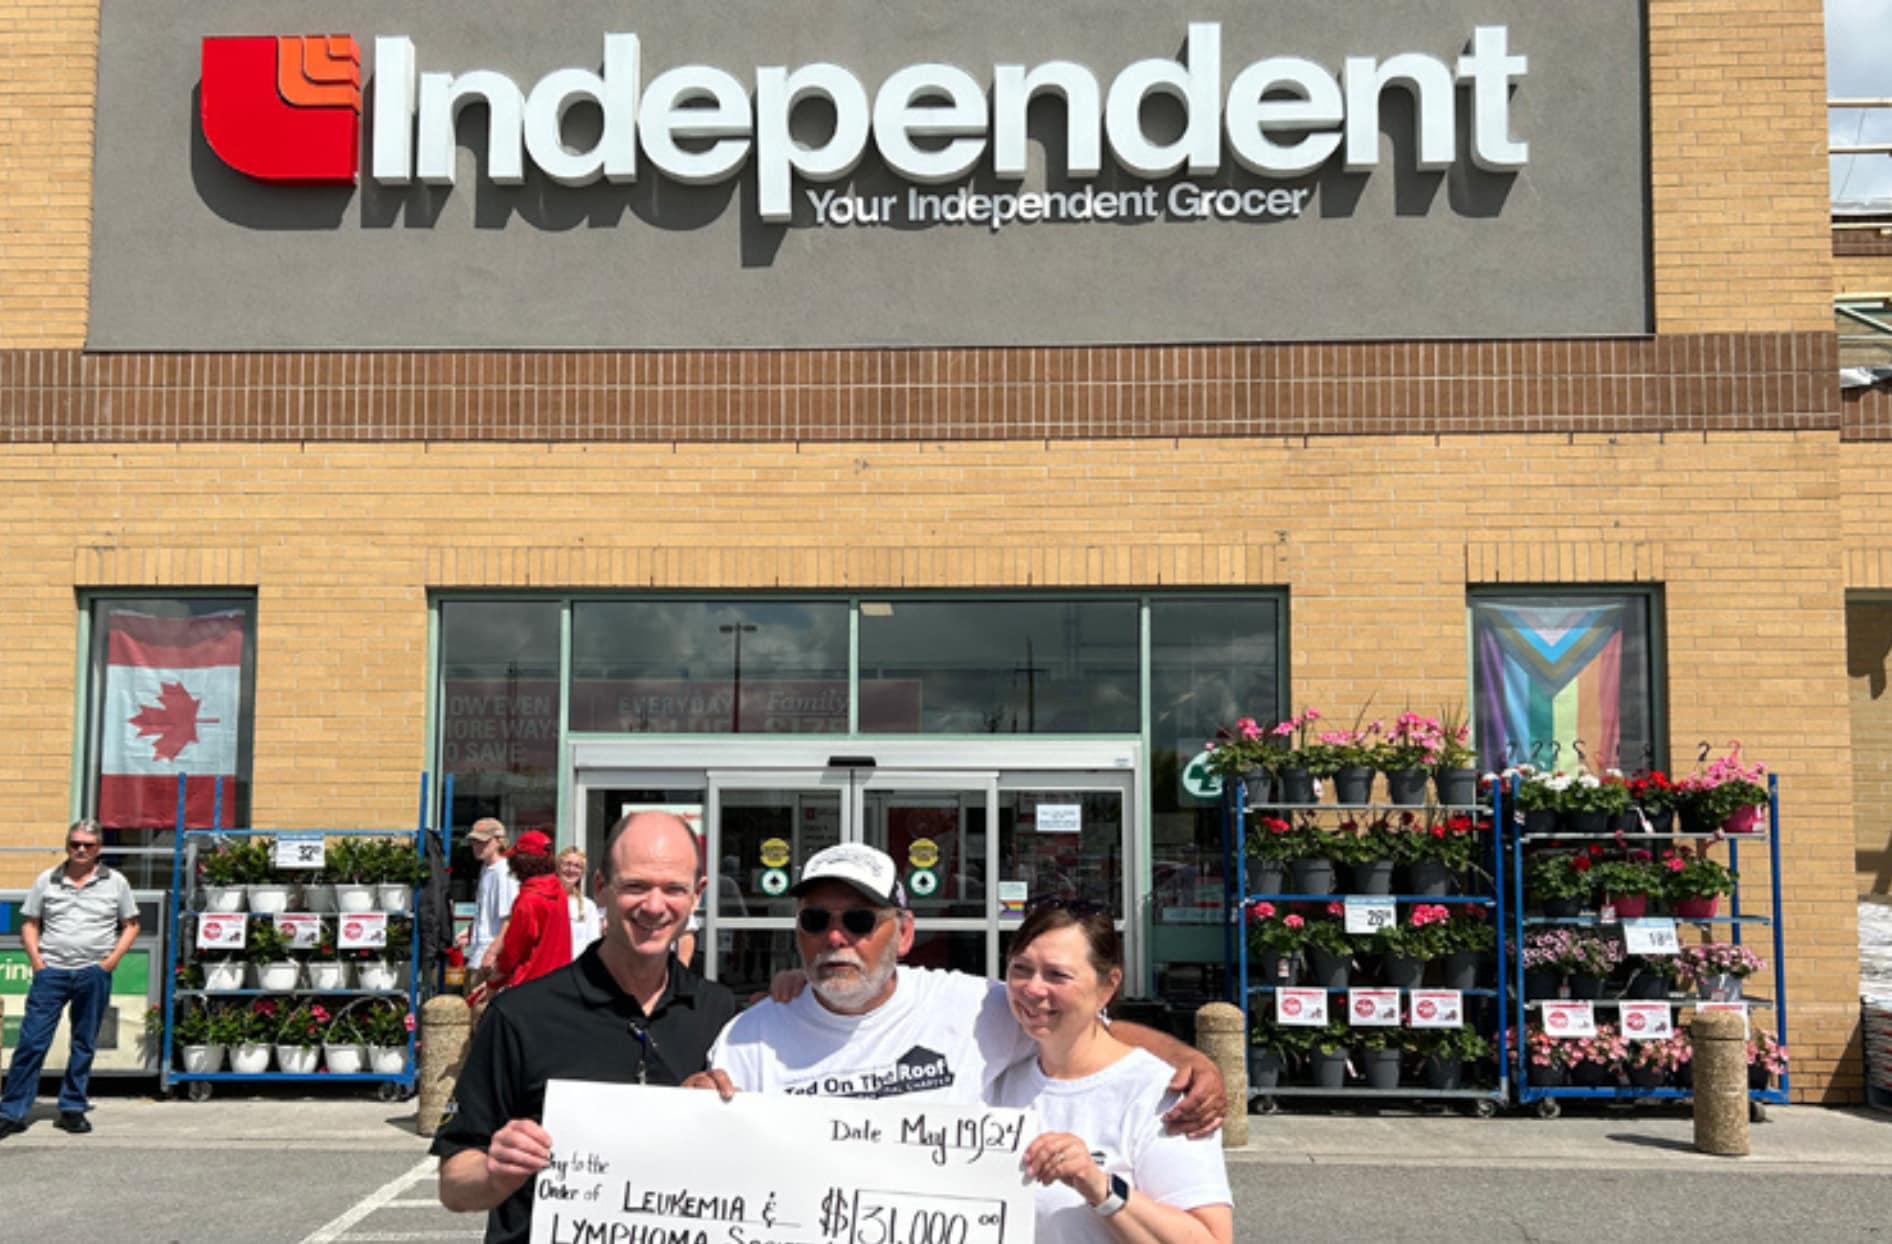 Morello’s Your Independent Grocer store owners David and Kimberley Morello smiling proudly alongside Ted Dawes after this year’s Ted on the Roof fundraiser in support of leukemia and lymphoma research. 